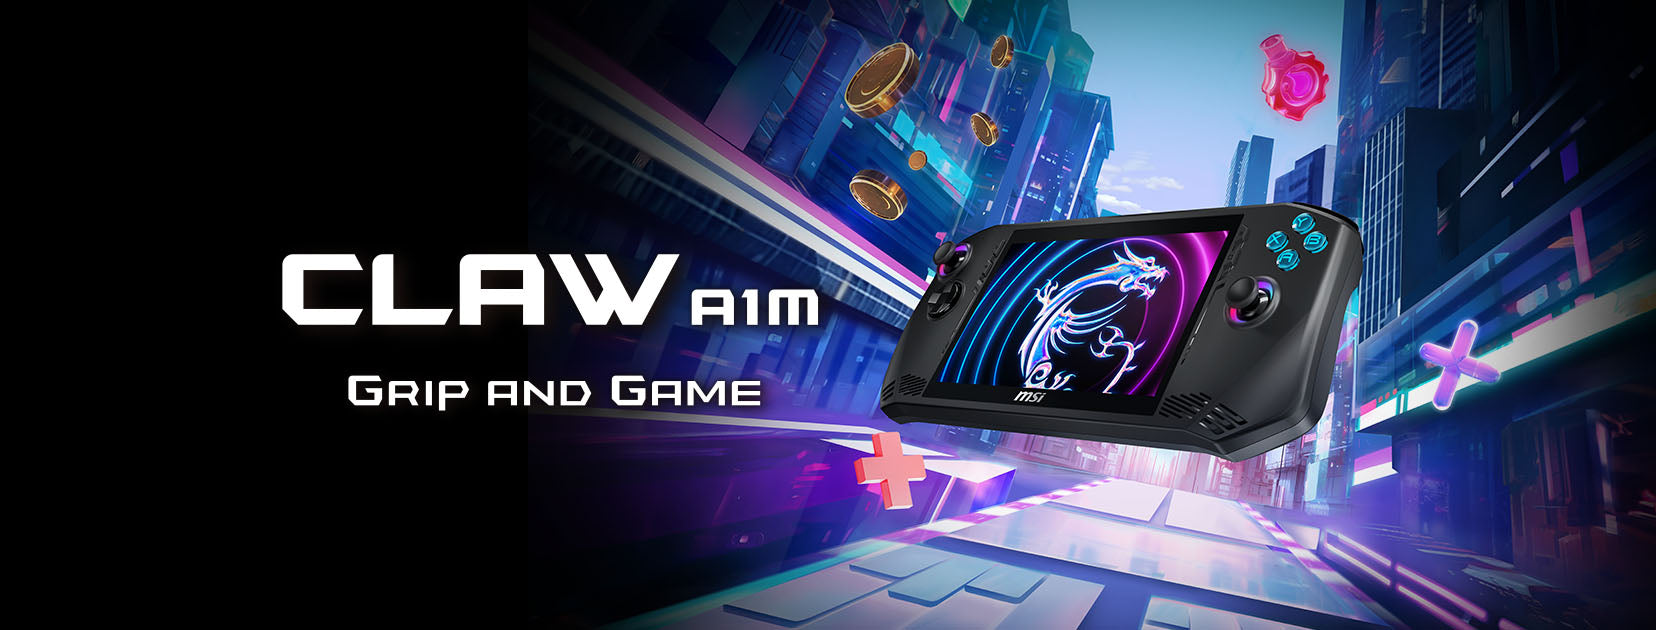 The MSI Claw Gaming Handheld Achieves Significant Gaming Performance I — MSI Online Store